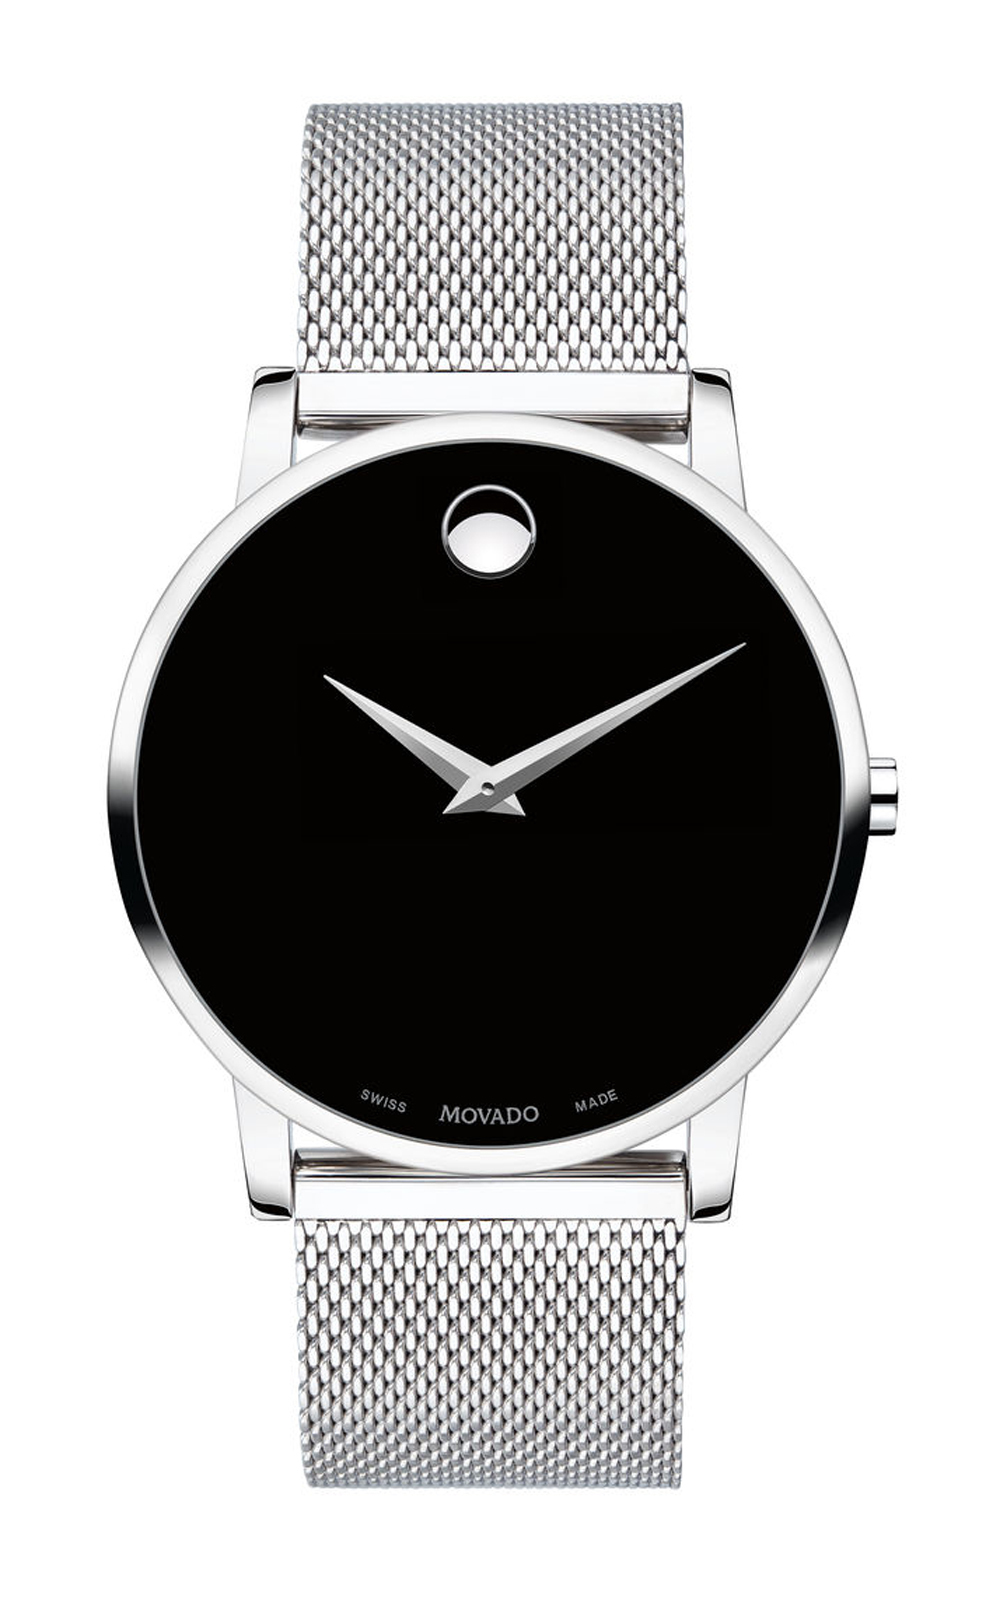 Đồng hồ Movado Museum Classic 0607219, 40mm